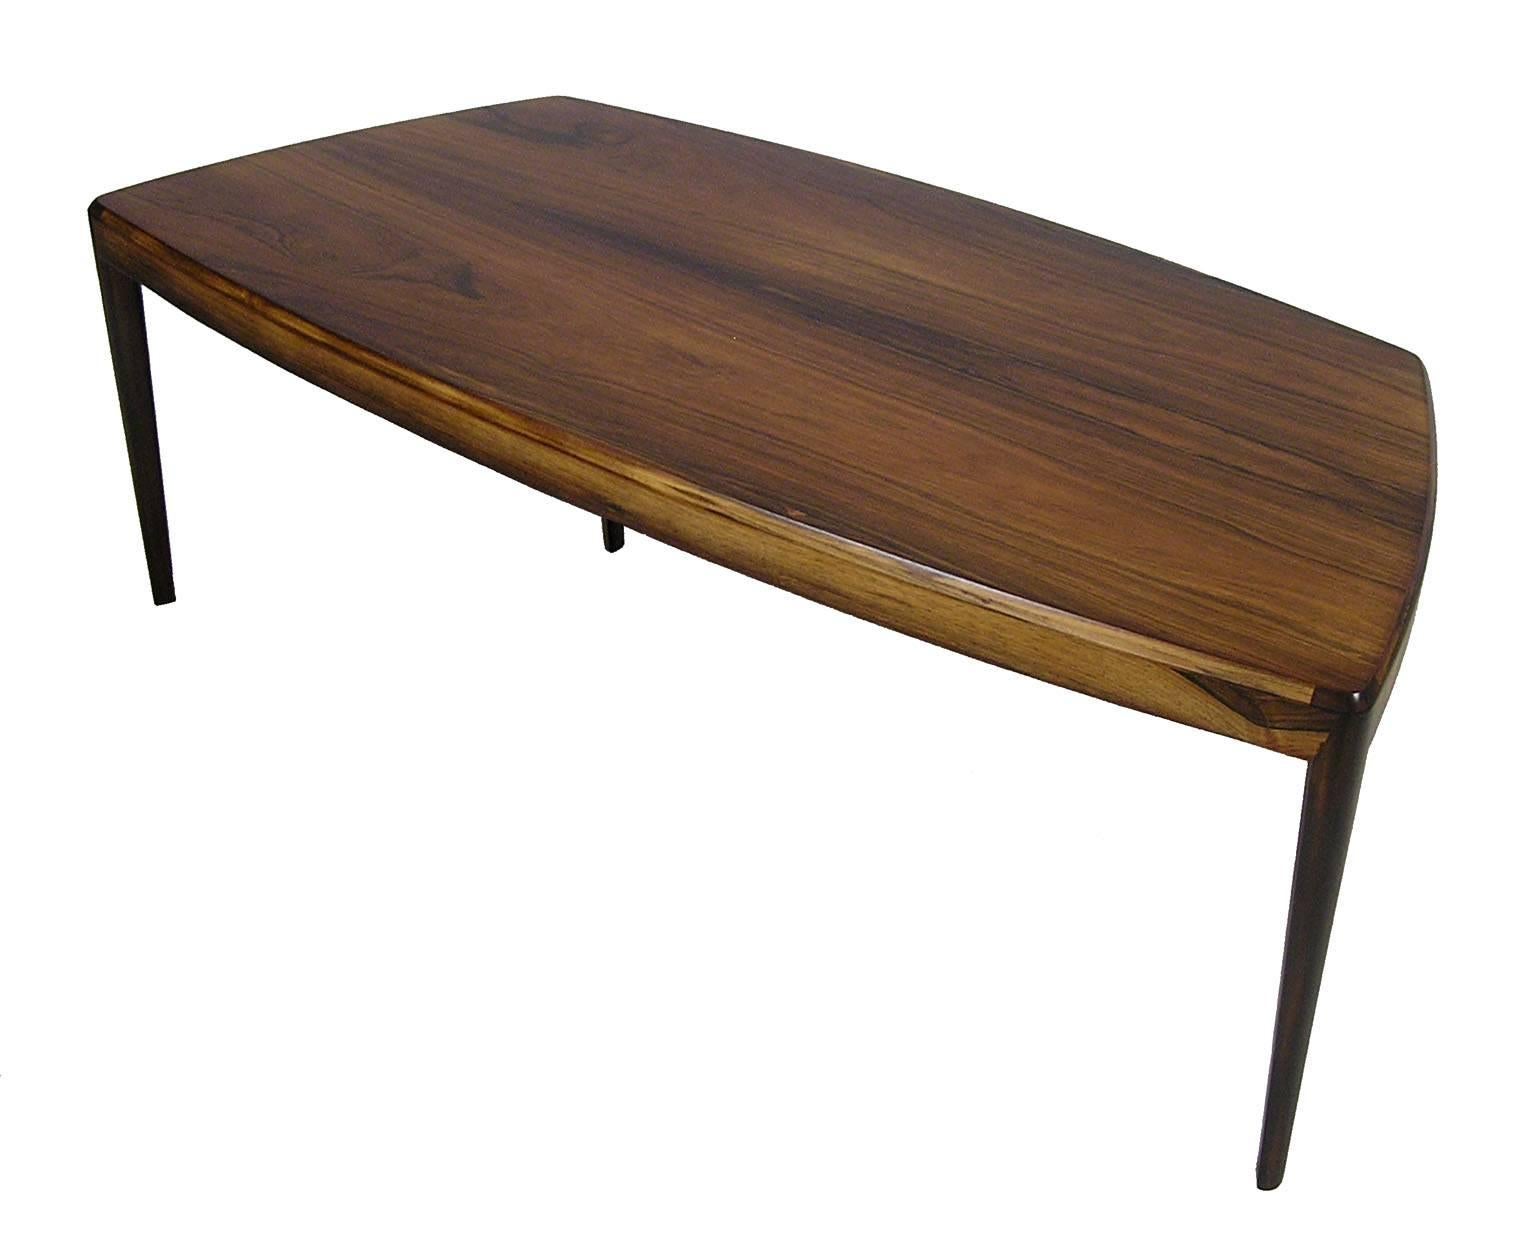 A gorgeous Brazilian rosewood coffee table from the 1960s Danish modern era. Designed by Kai Kristiansen and in excellent newly refinished condition. Amazing craftsmanship throughout featuring a stylish curved biomorphic profile and beautifully